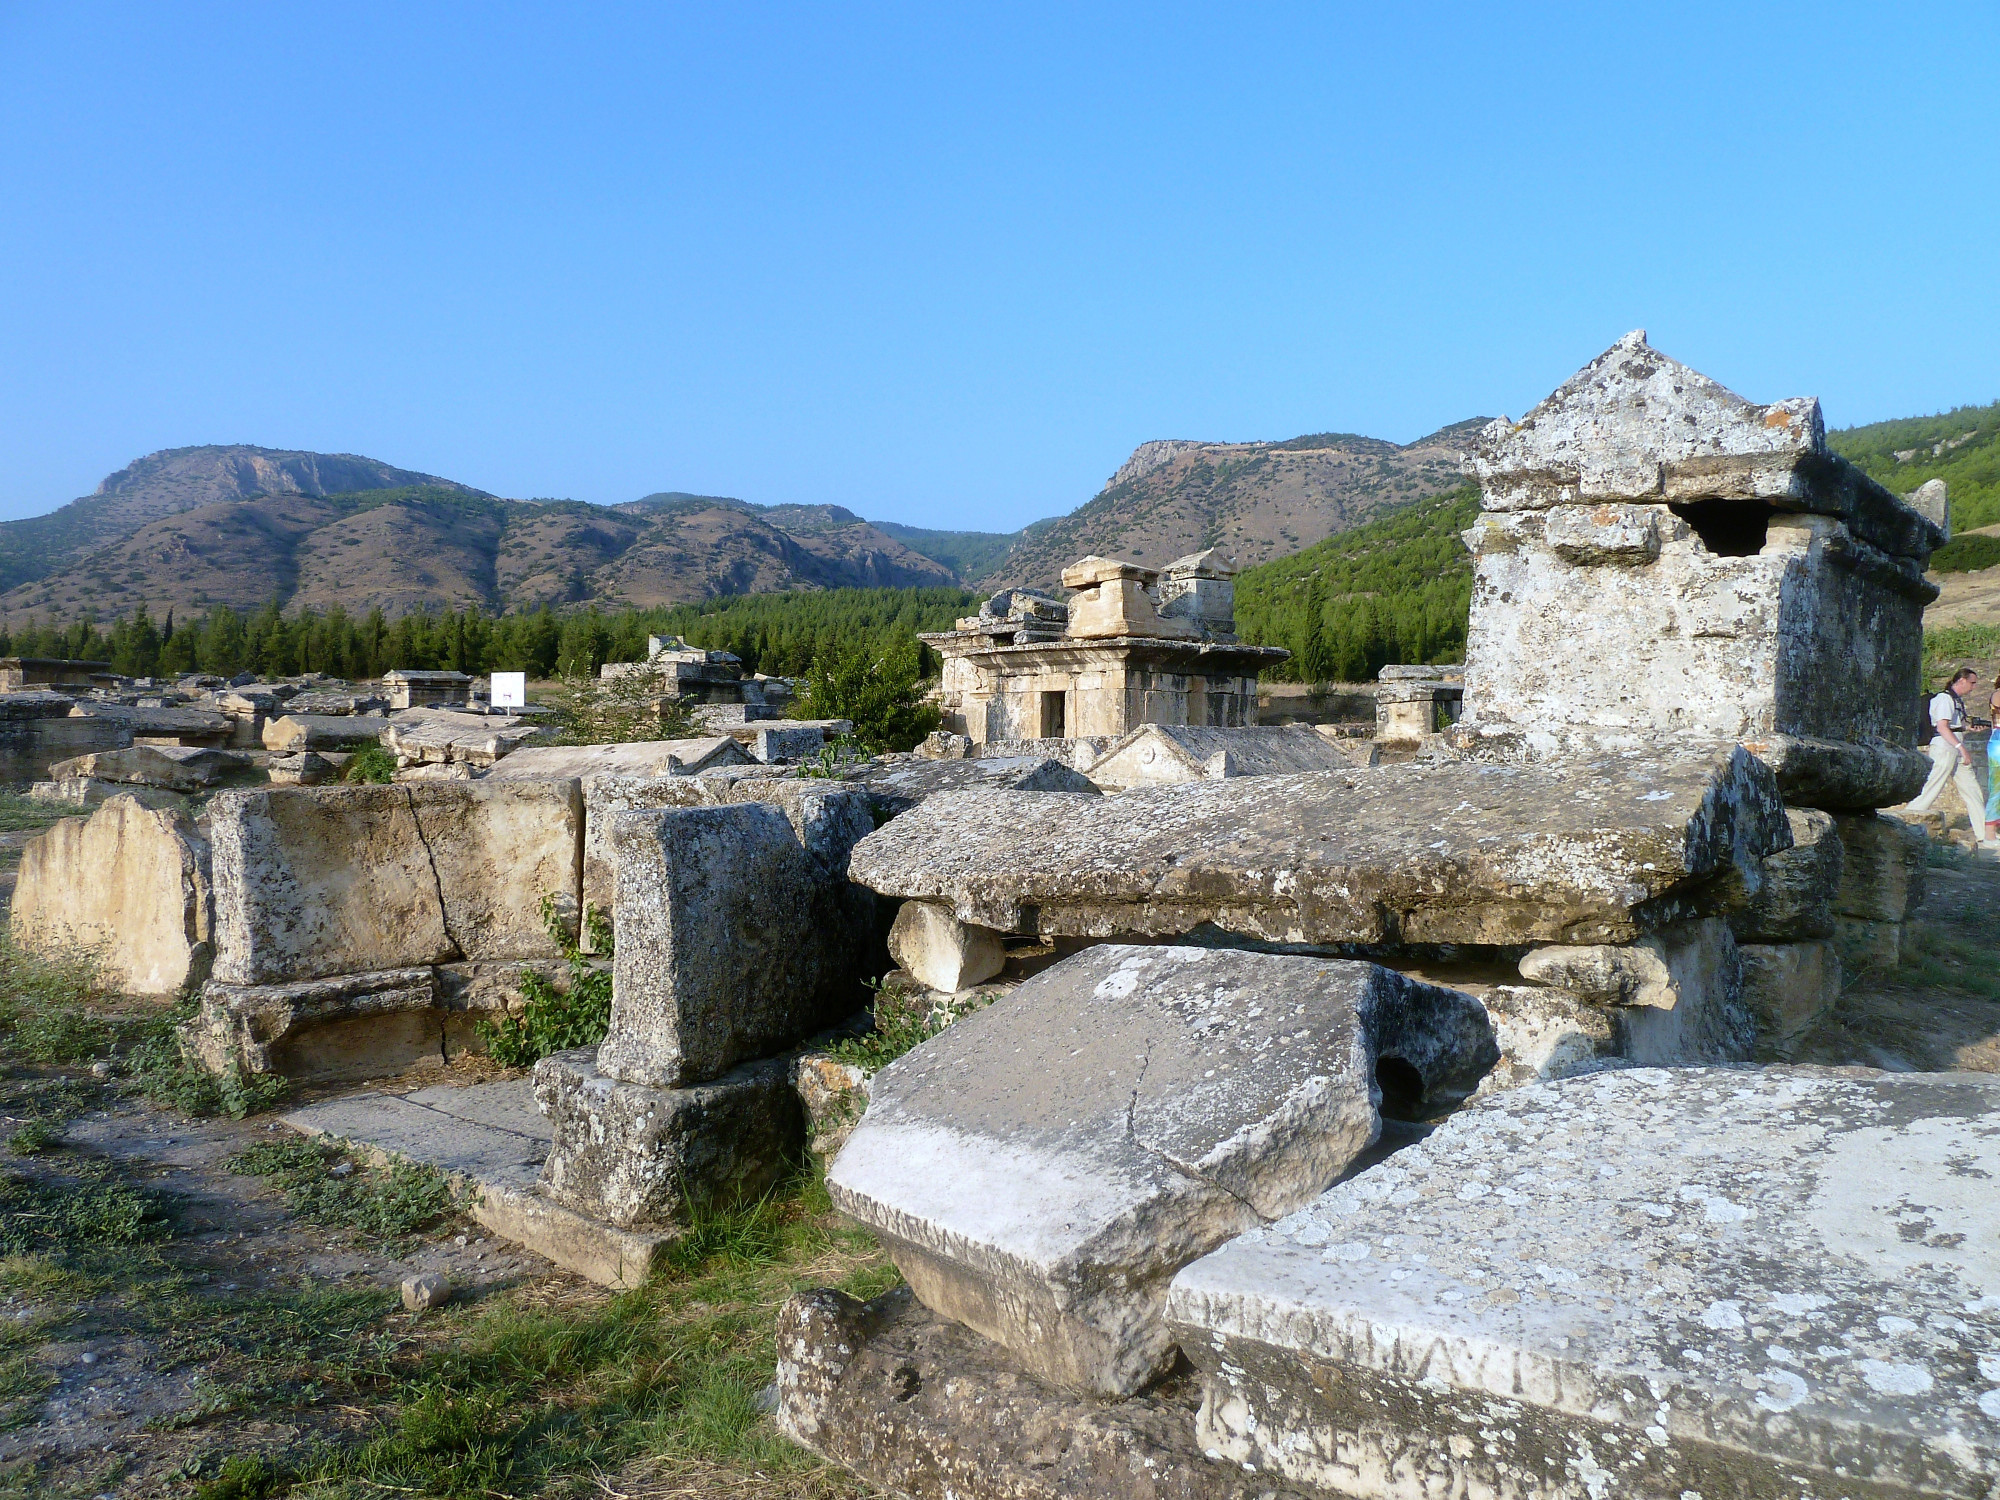 Sarcophagus and tombs in Necropolis